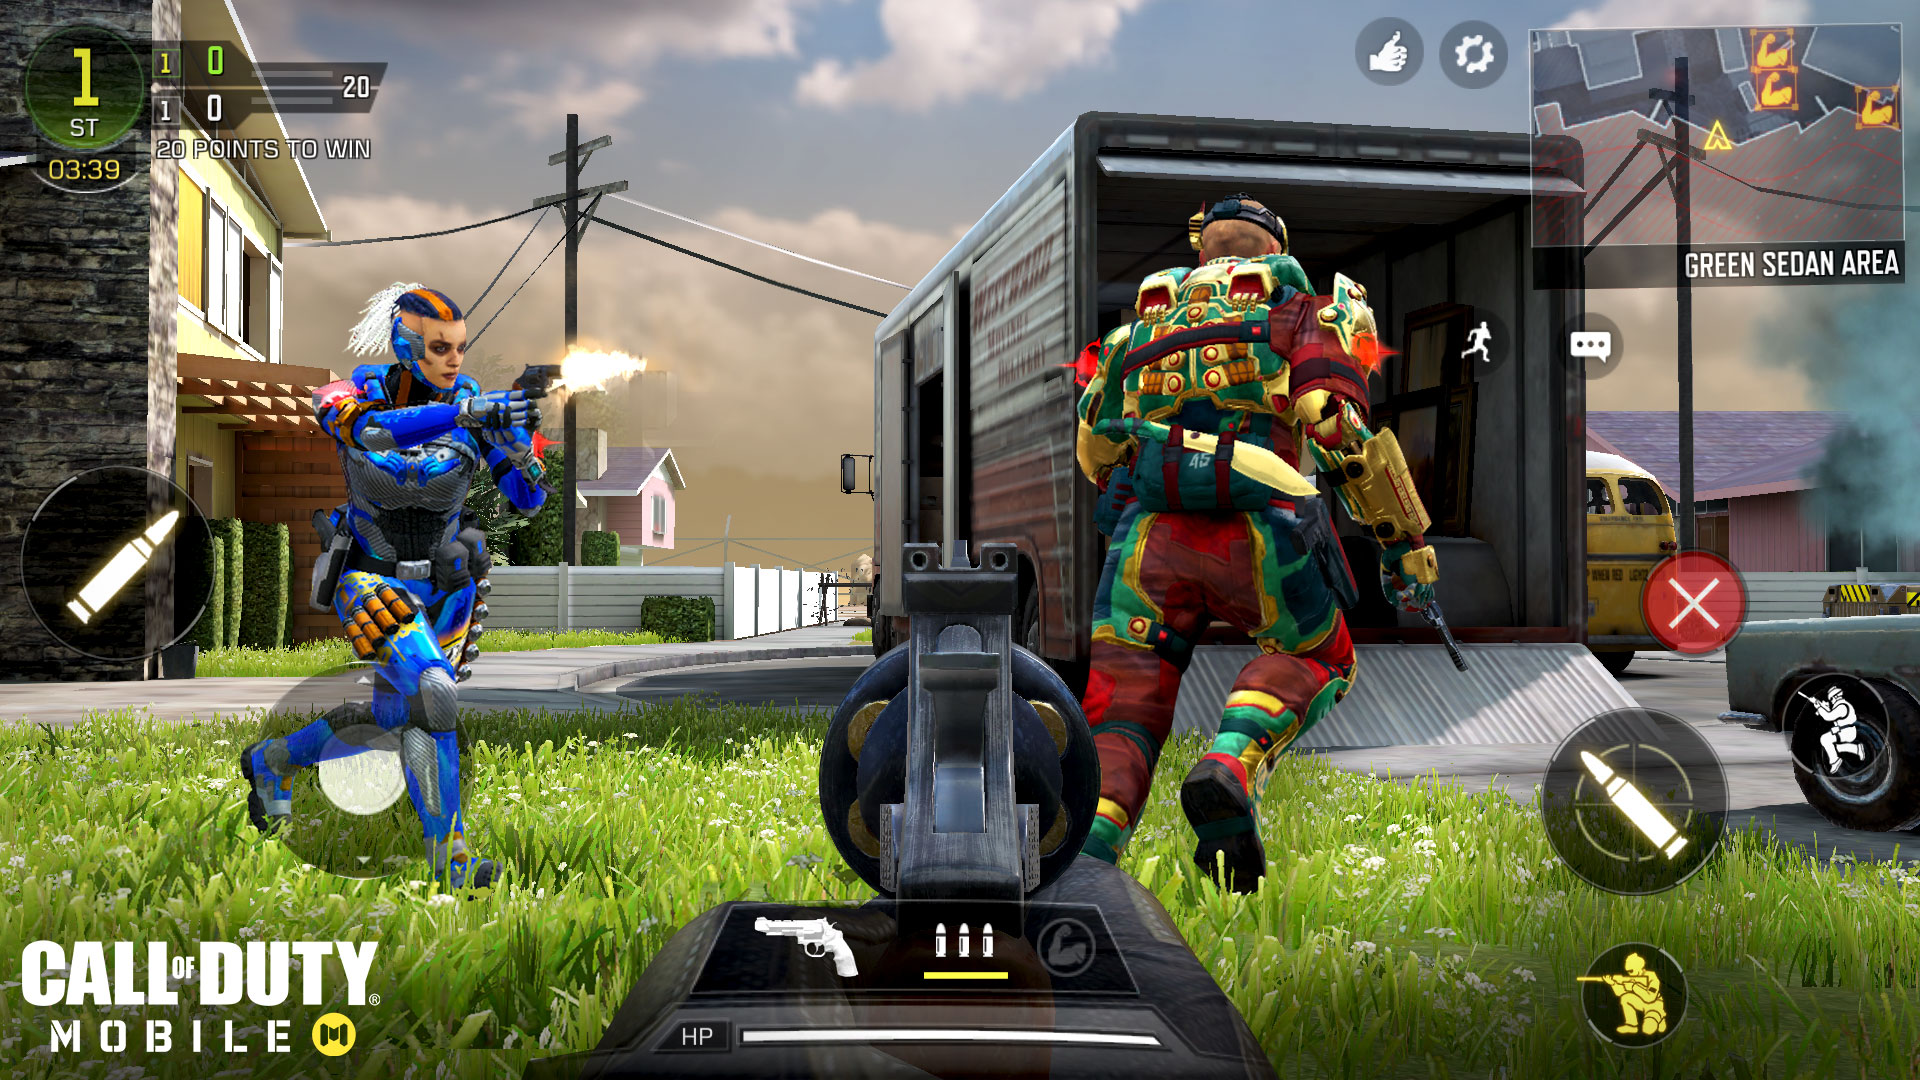 Free For All: The Hot New Game Mode in Call of Duty: Mobile